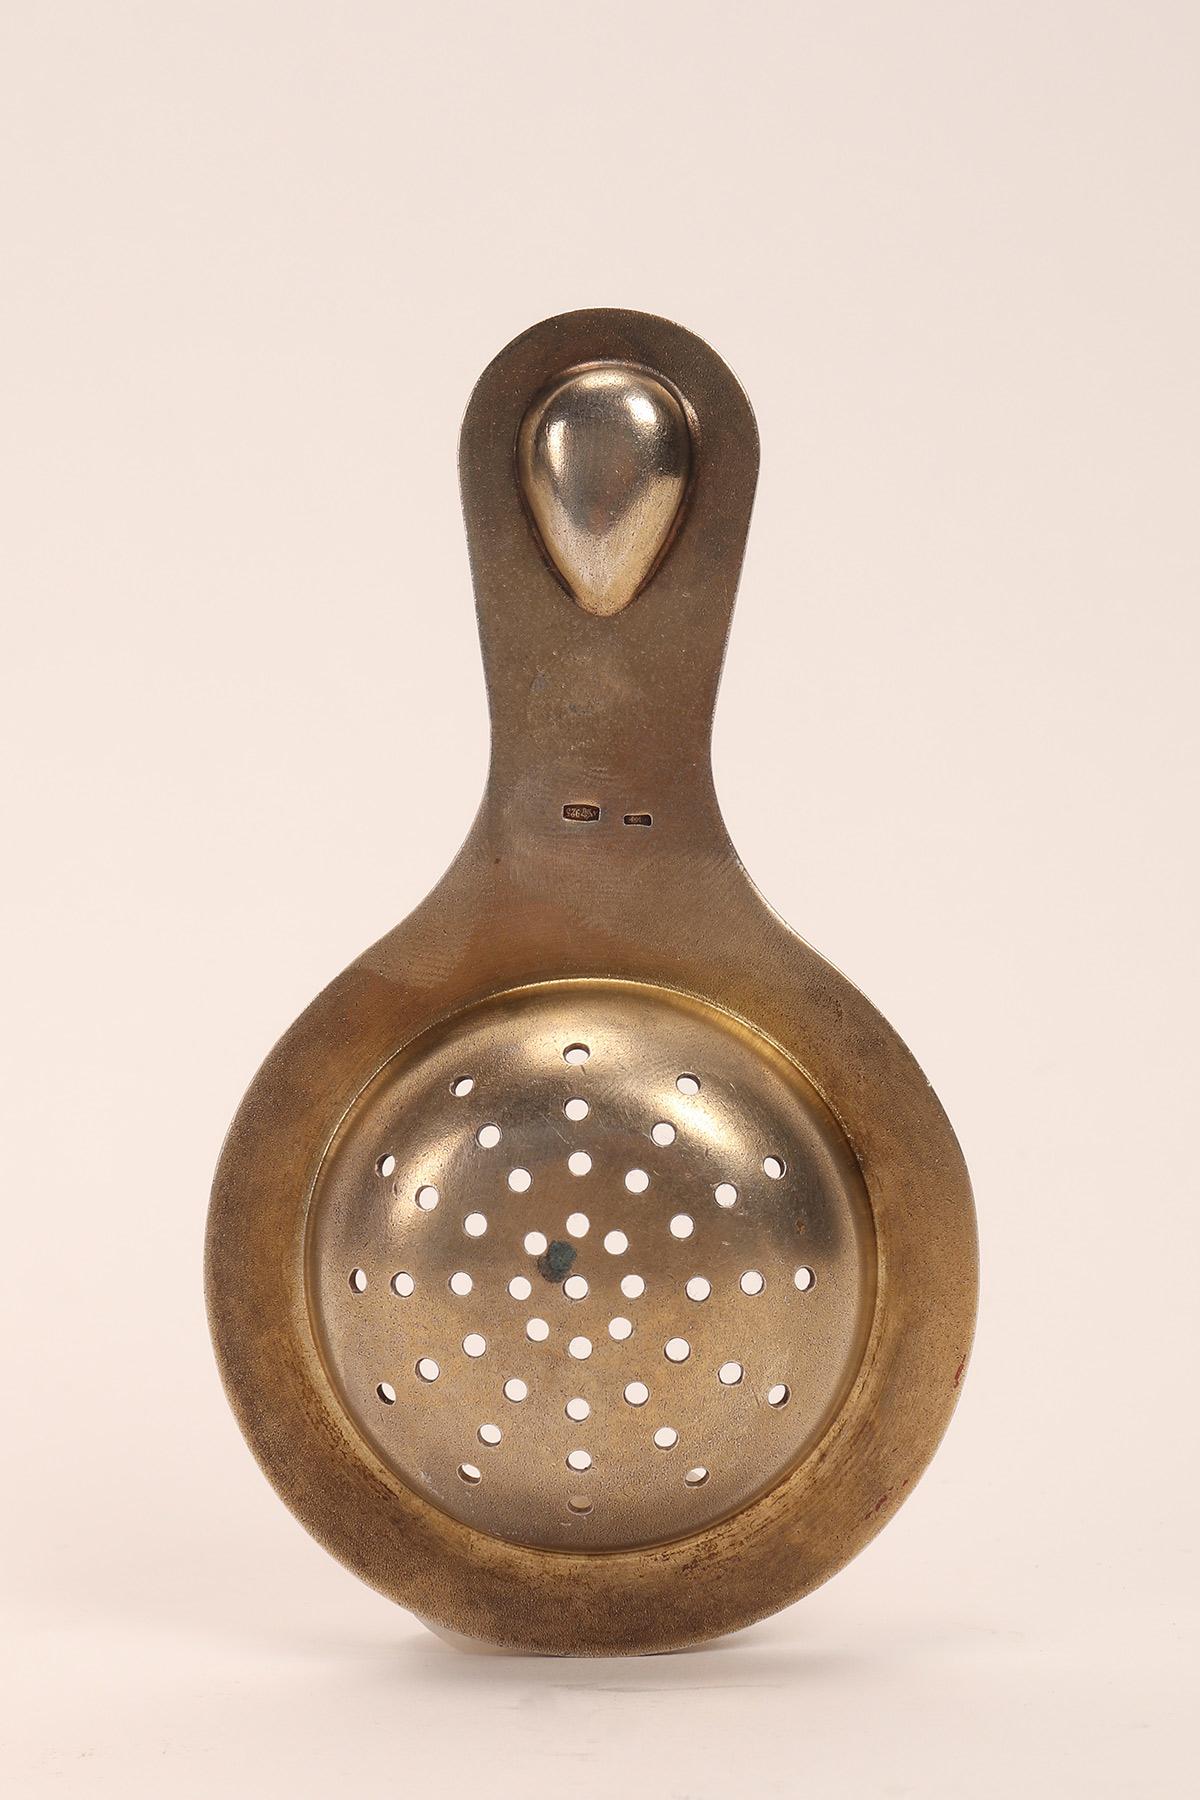 20th Century Silver and Enamels Tea Strainer, URSS, 1940 For Sale